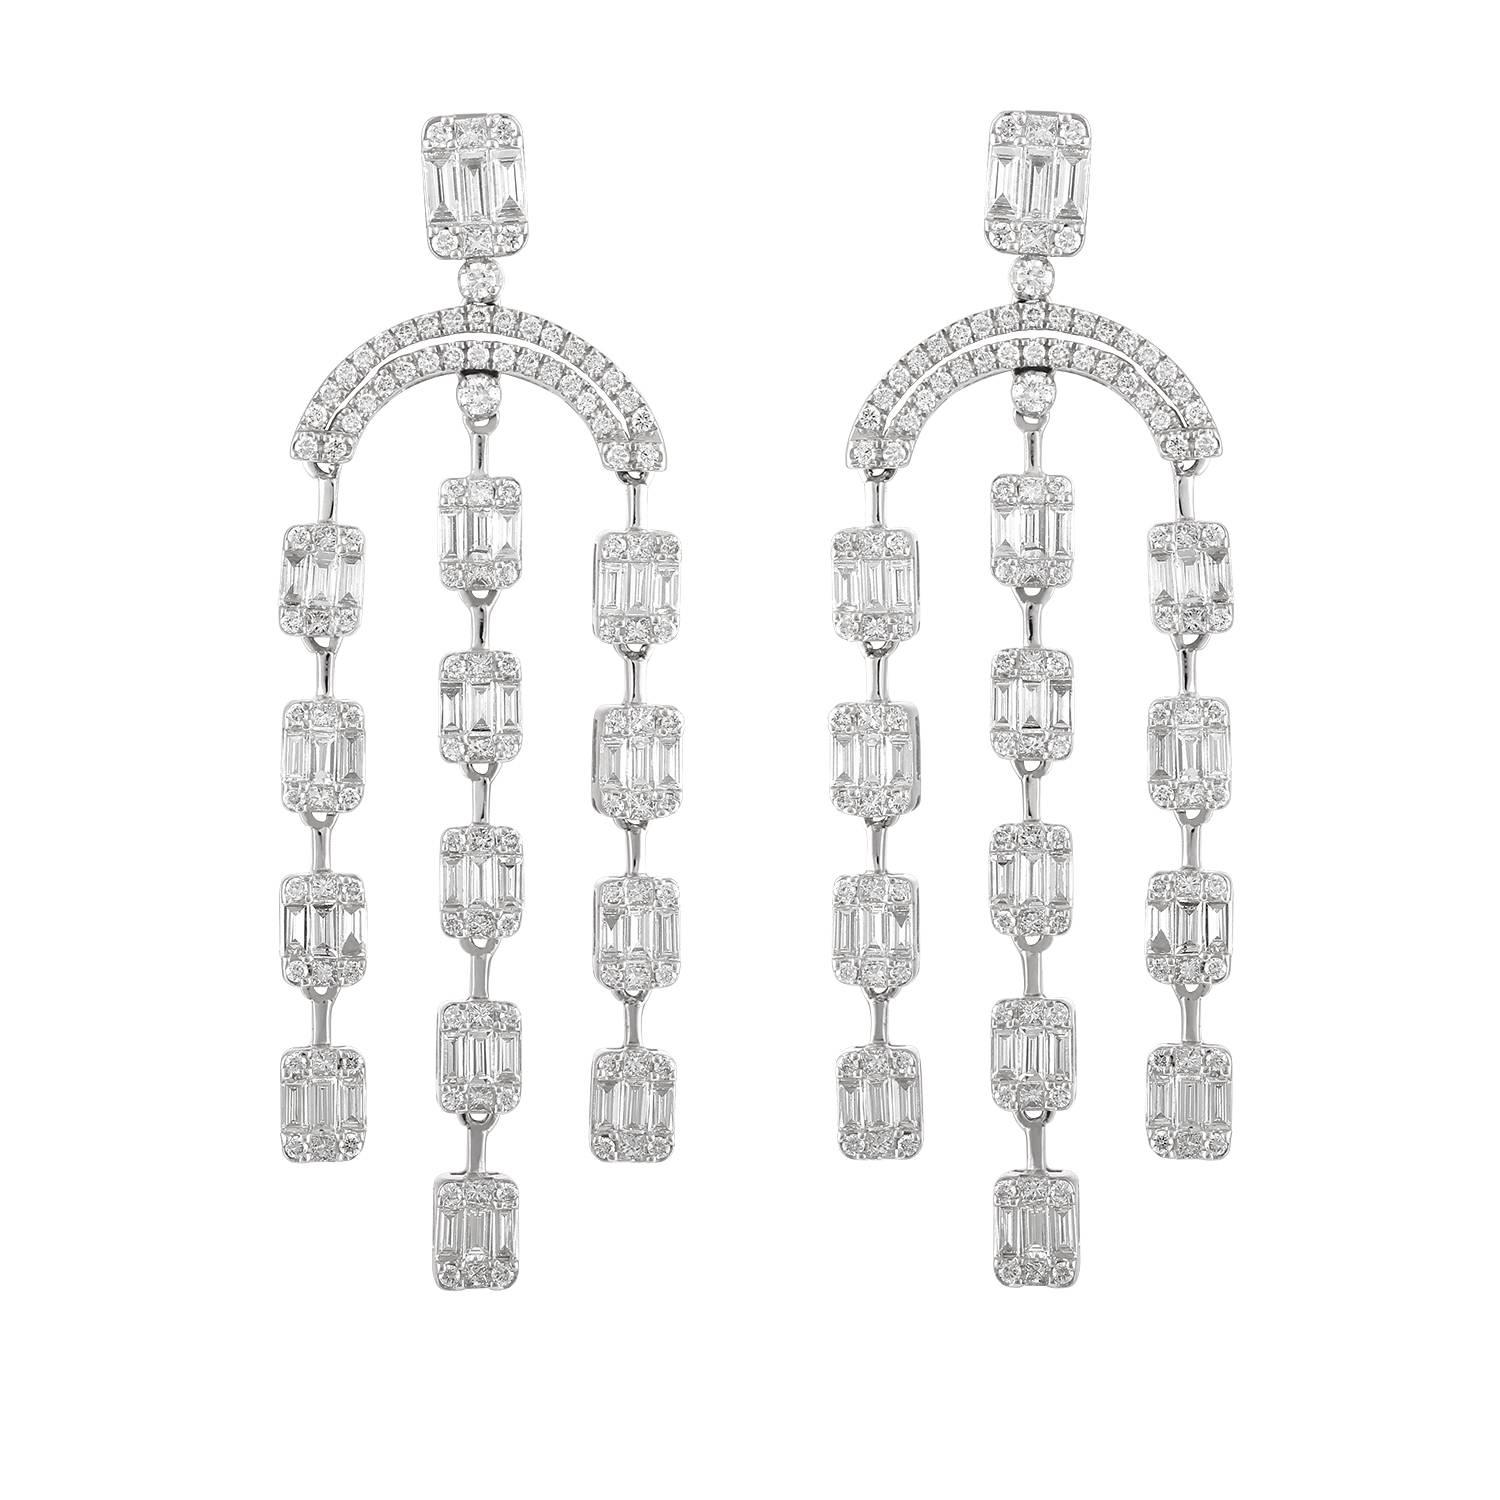 18 Karat White Gold Chandelier Earrings with Round Brilliants and Baguettes